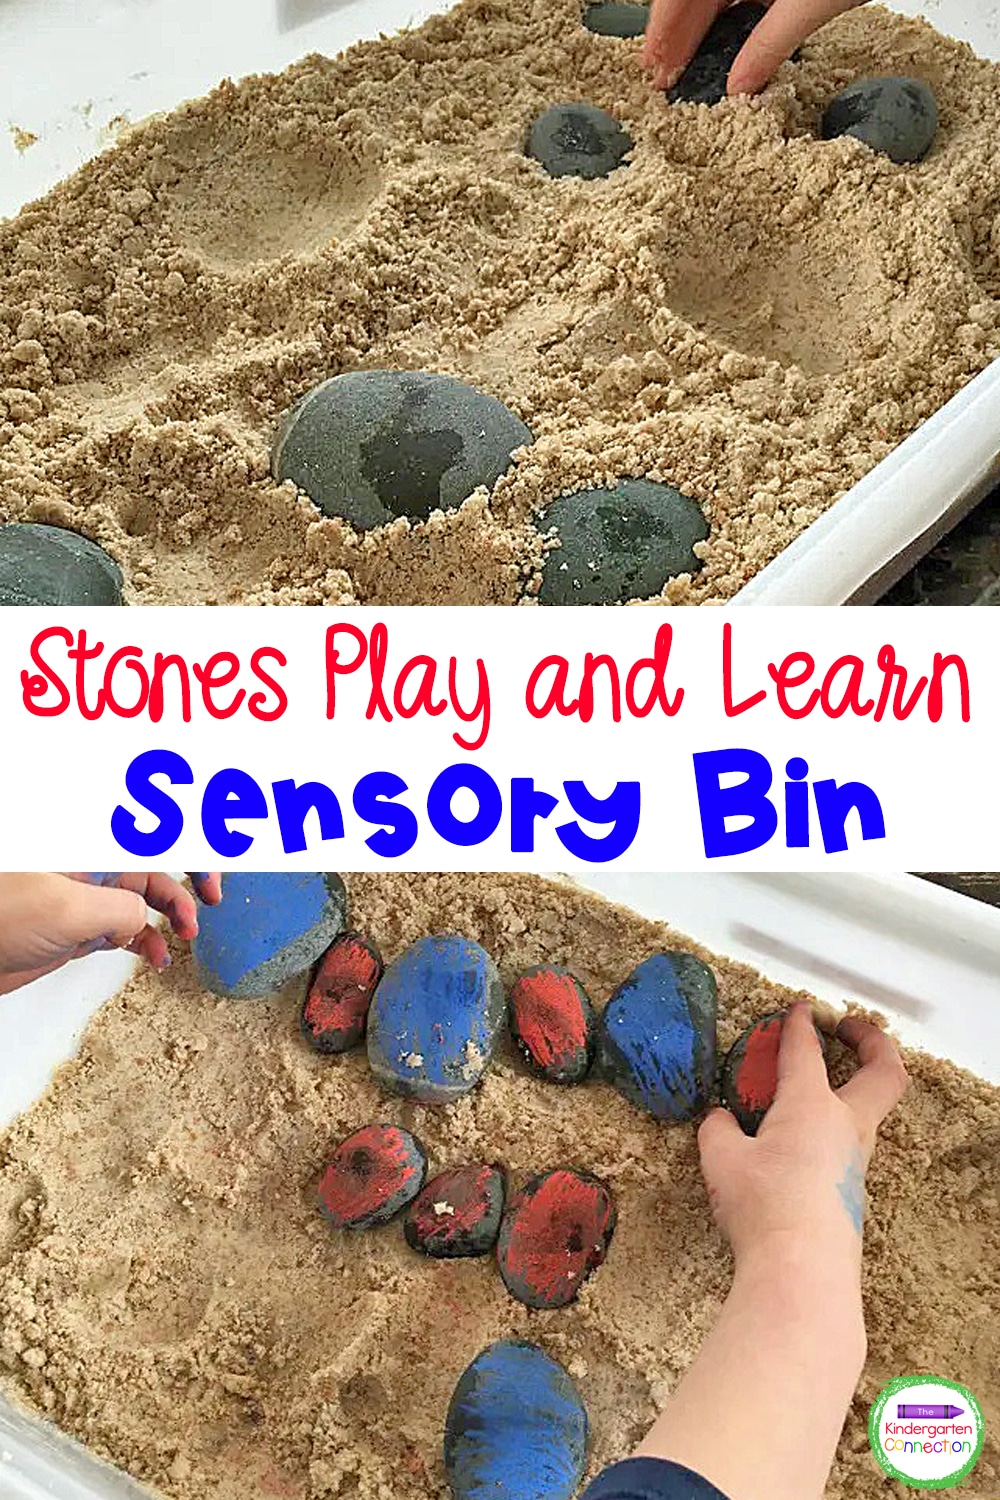 Grab some stones and this easy recipe for moon sand for a fun Stones and Sand Sensory Bin Activity! Work on patterning, sorting, and more!